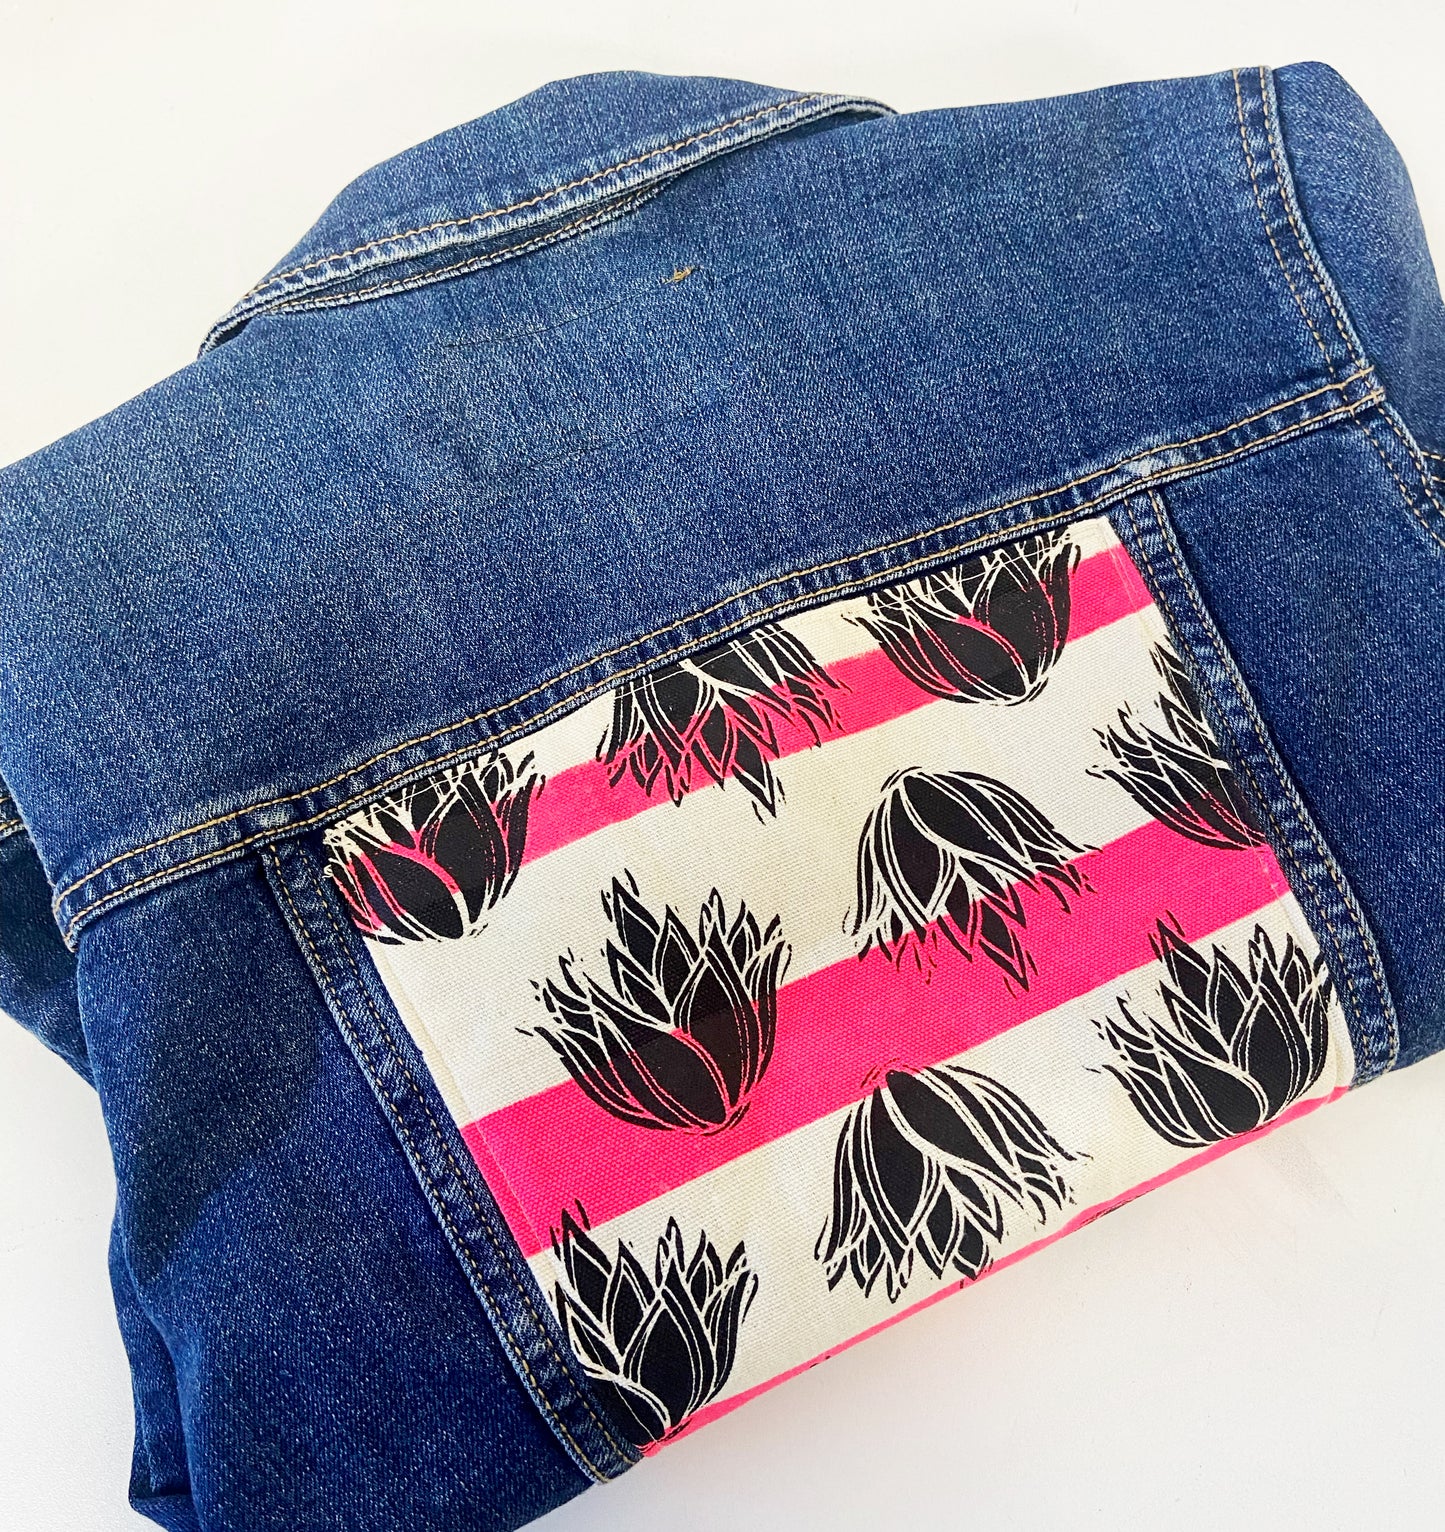 One of a Kind Upcycled Jean with Hand Printed Pink Agave Cactus Cotton Fabric